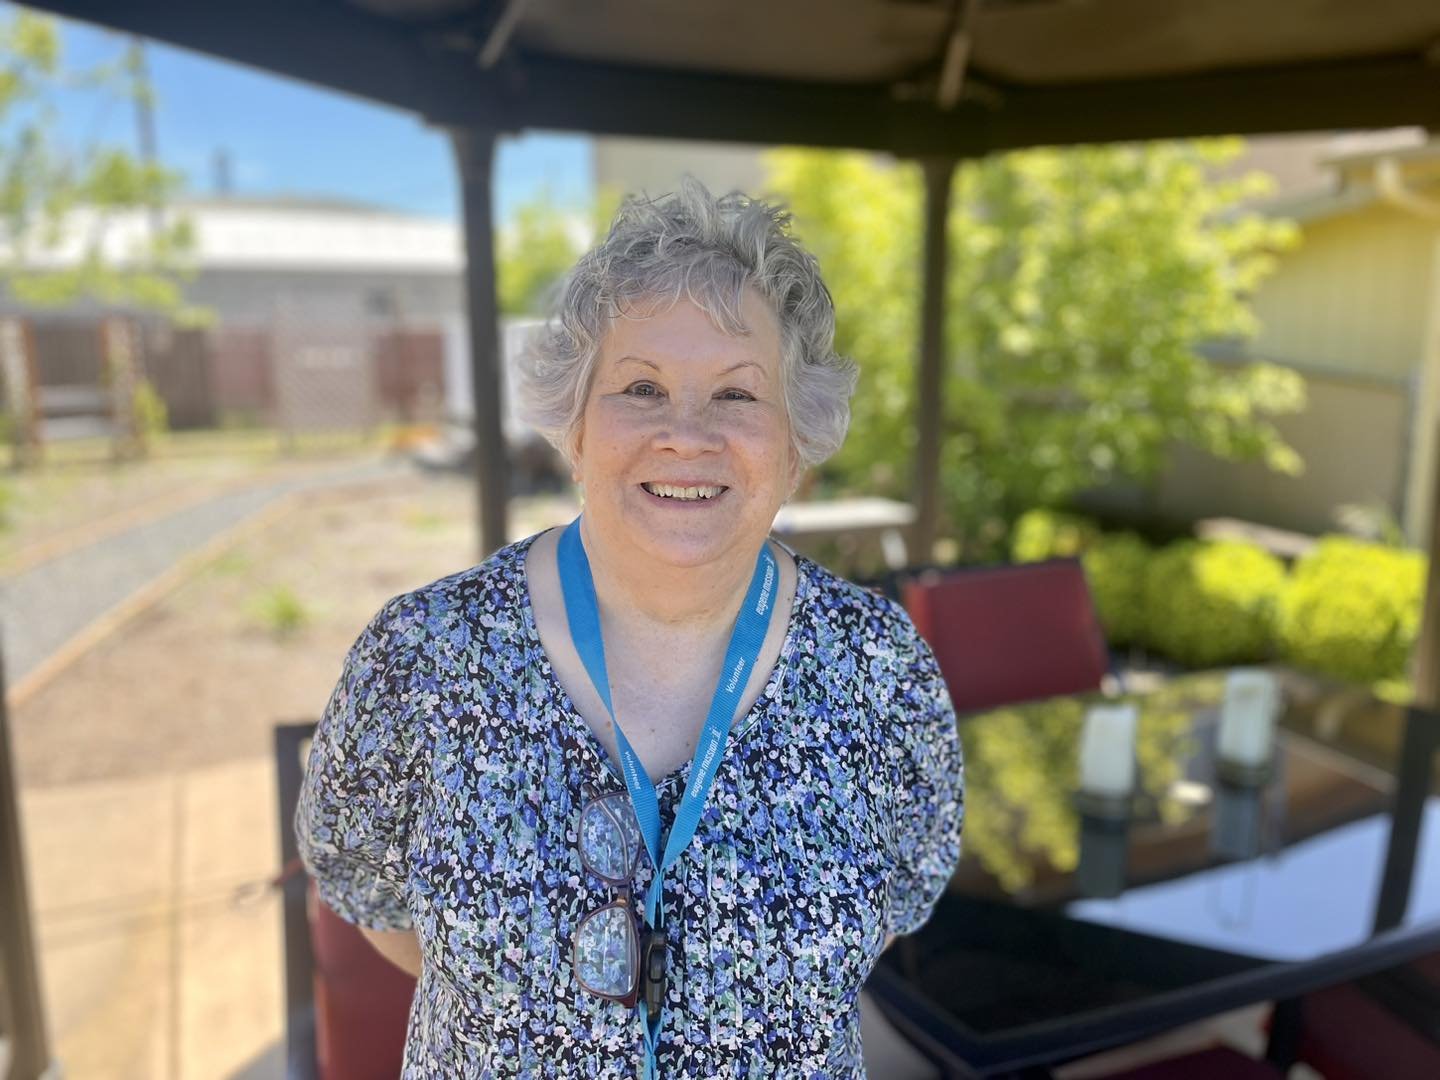 Volunteer spotlight!
 
Nanette has been volunteering at the Eugene Mission for several years and keeps coming back because she said there&rsquo;s a powerful sense of hope here.
 
Nanette has been in recovery for more than a decade and sees service as